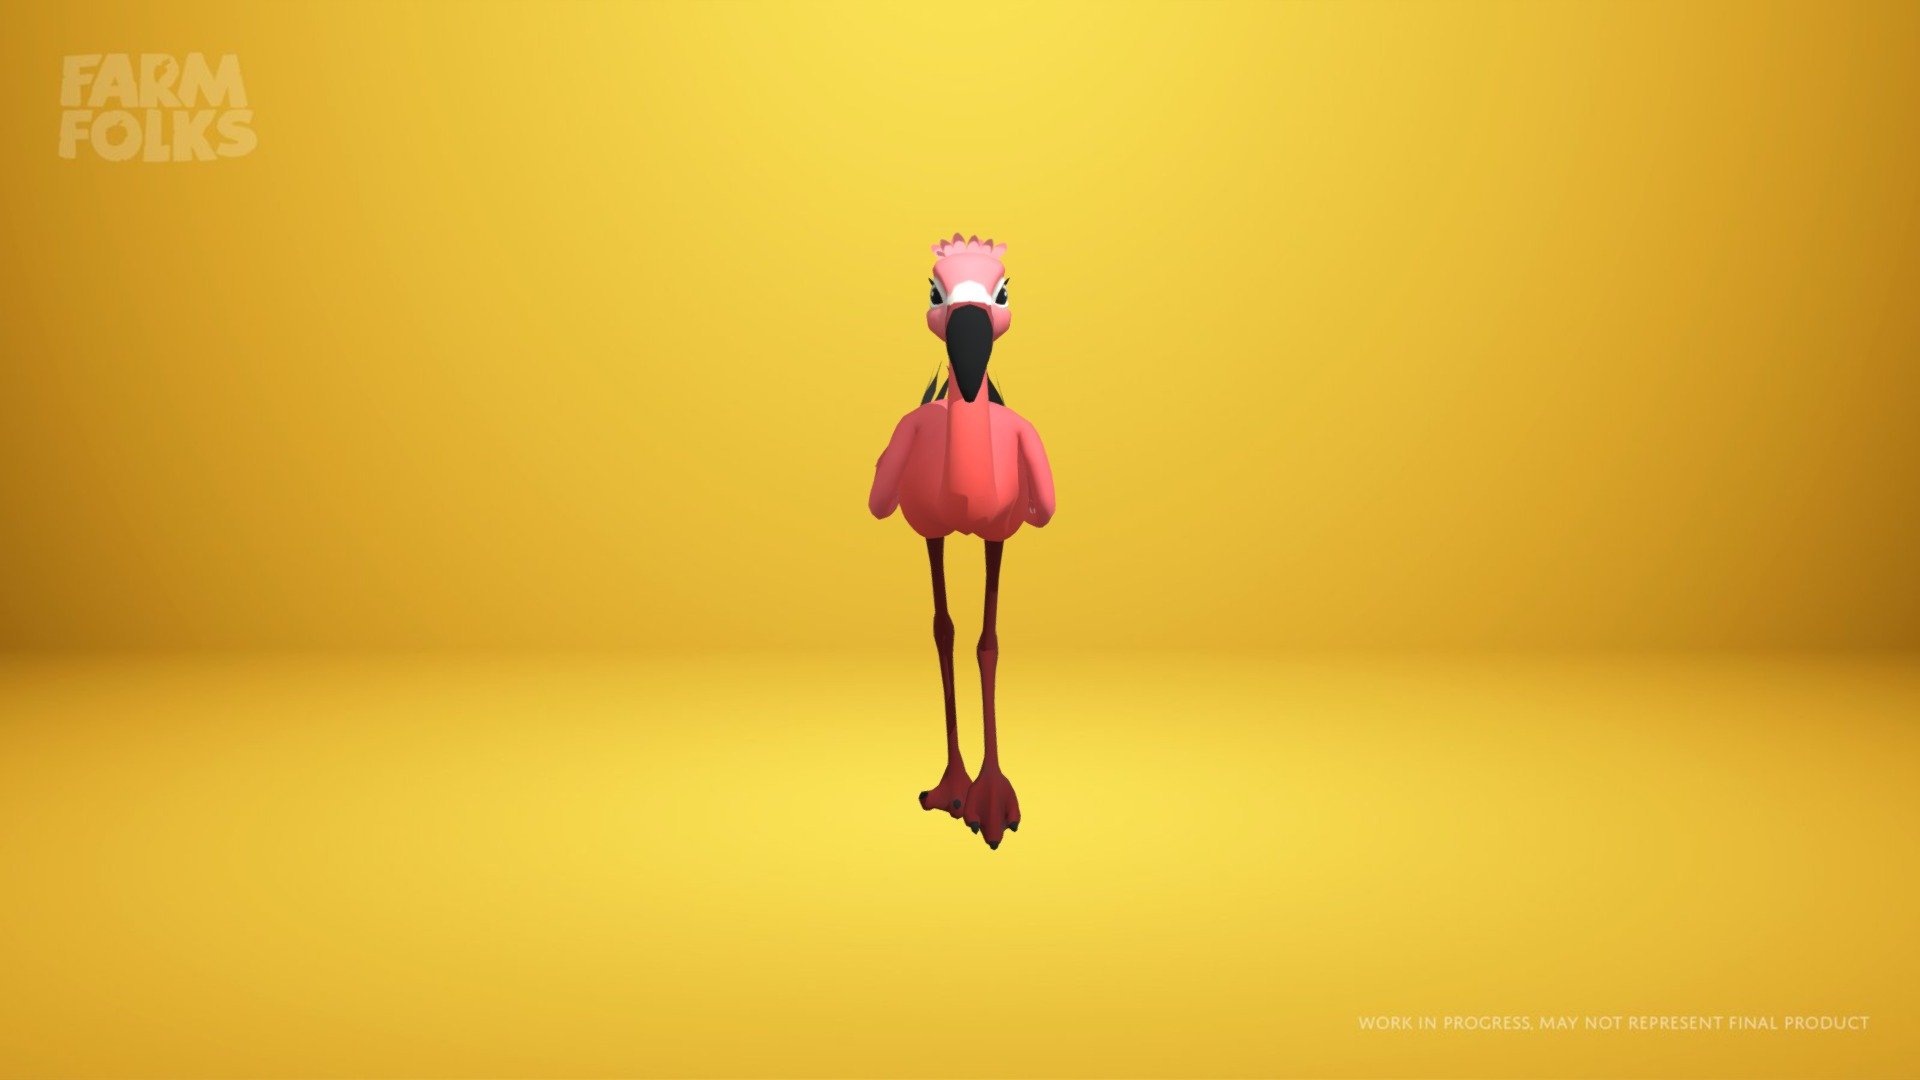 This is the jogging animation for flamingos [Farm Folks] 

About Farm Folks

Farm Folks is a third-person life simulator sandbox multiplayer game with an open-world experience that seamlessly merges resource management and automation into a farm building with extensive customization. Play alone or with friends and build your ultimate farm factory with almost no limits.

Launching soon on Kickstarter: https://www.kickstarter.com/projects/crytivogames/farm-folks-0
Join Farm Folks Discussion on Discord: https://discord.gg/farmfolks
Follow our Updates closer at: https://x.com/farmfolksgame
Sign-up to our Email Updates: https://farmfolksgame.com/ - Flamingo Jogging Animation [Farm Folks] - 3D model by Crytivo 3d model